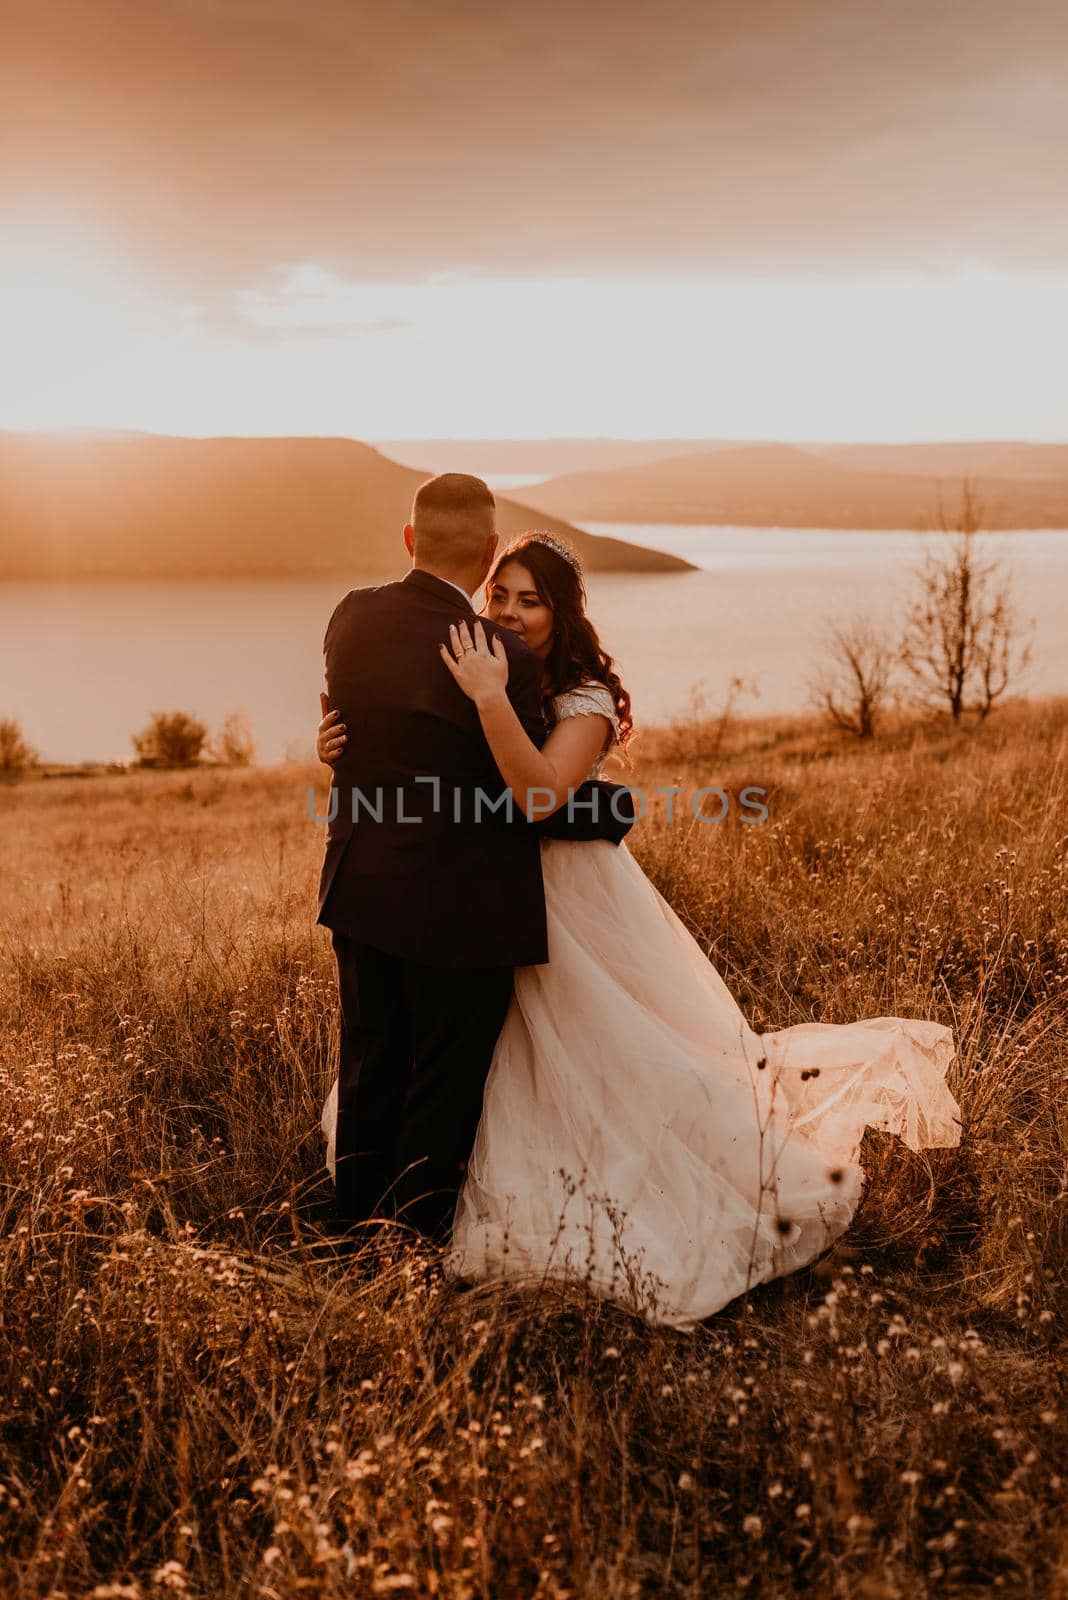 A loving couple wedding newlyweds in white dress and suit walk hug kissing whirl on tall grass in summer field on mountain above the river.style bride accessories on head crown makeup hairstyle